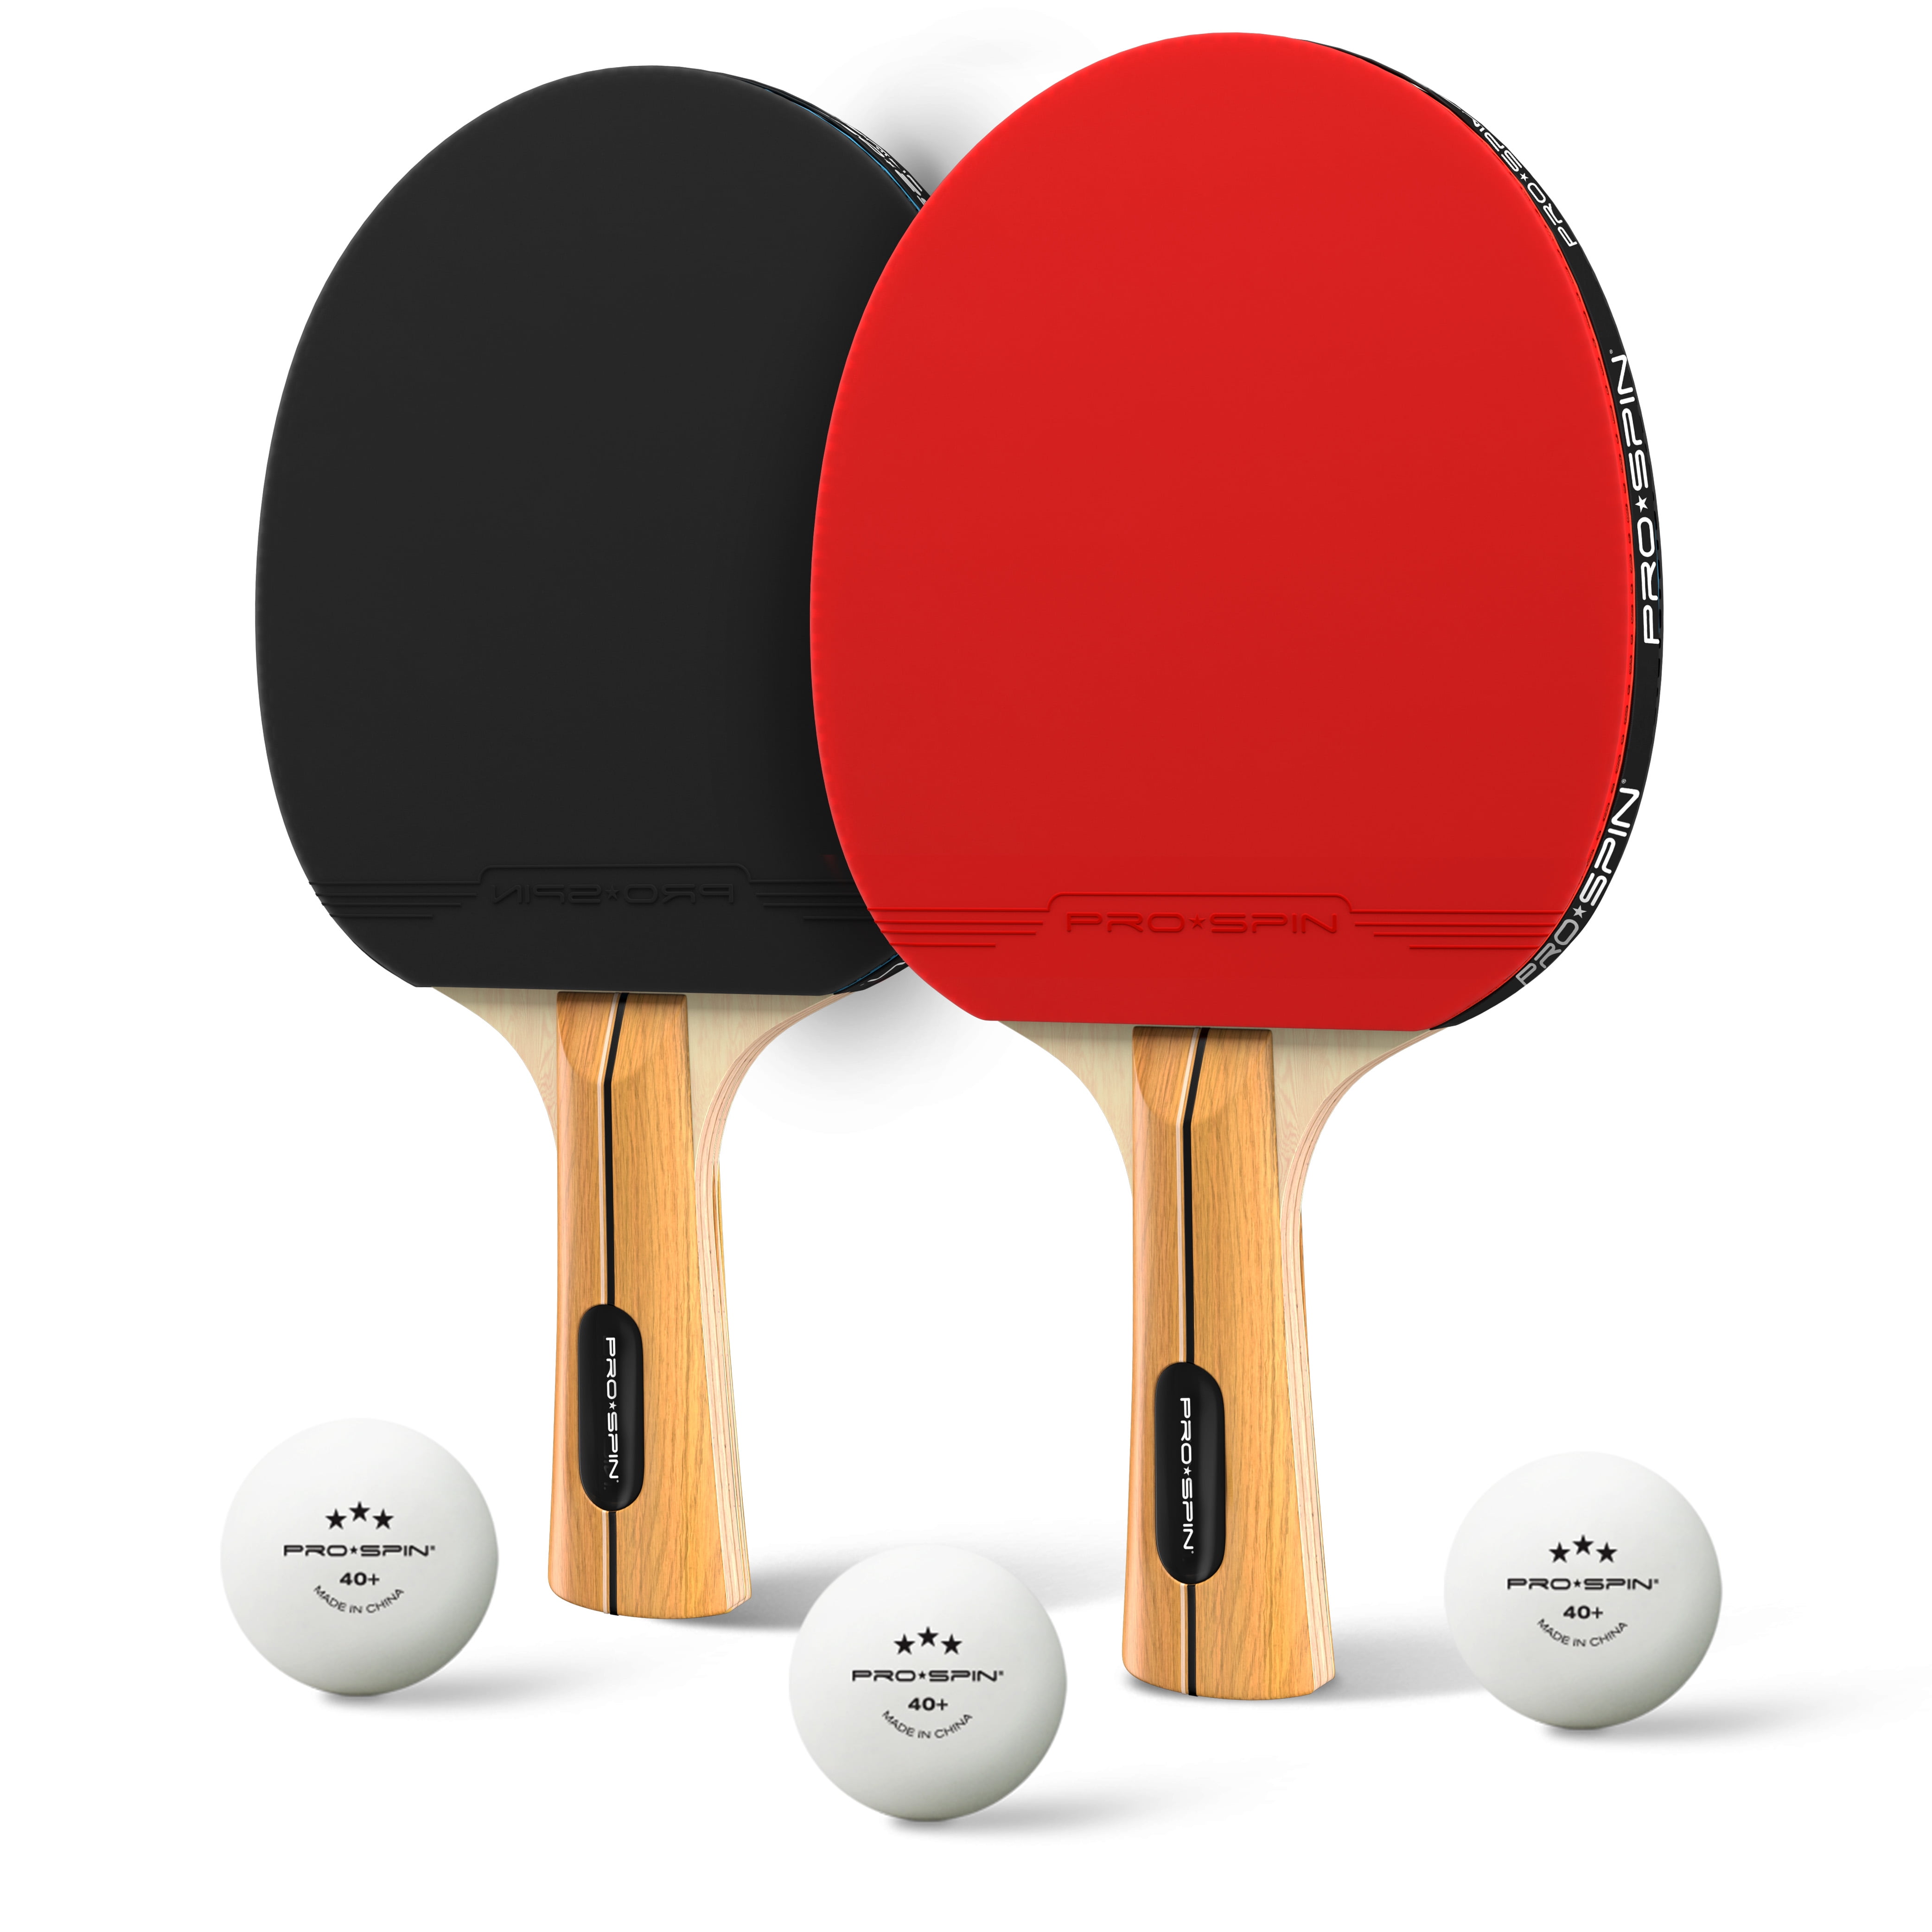 Hectare Gewoon Acht PRO-SPIN Ping Pong Paddles, 2-Player Set, High-Performance Table Tennis  Rackets, 3-Star Ping Pong Balls, Compact Storage Case - Walmart.com